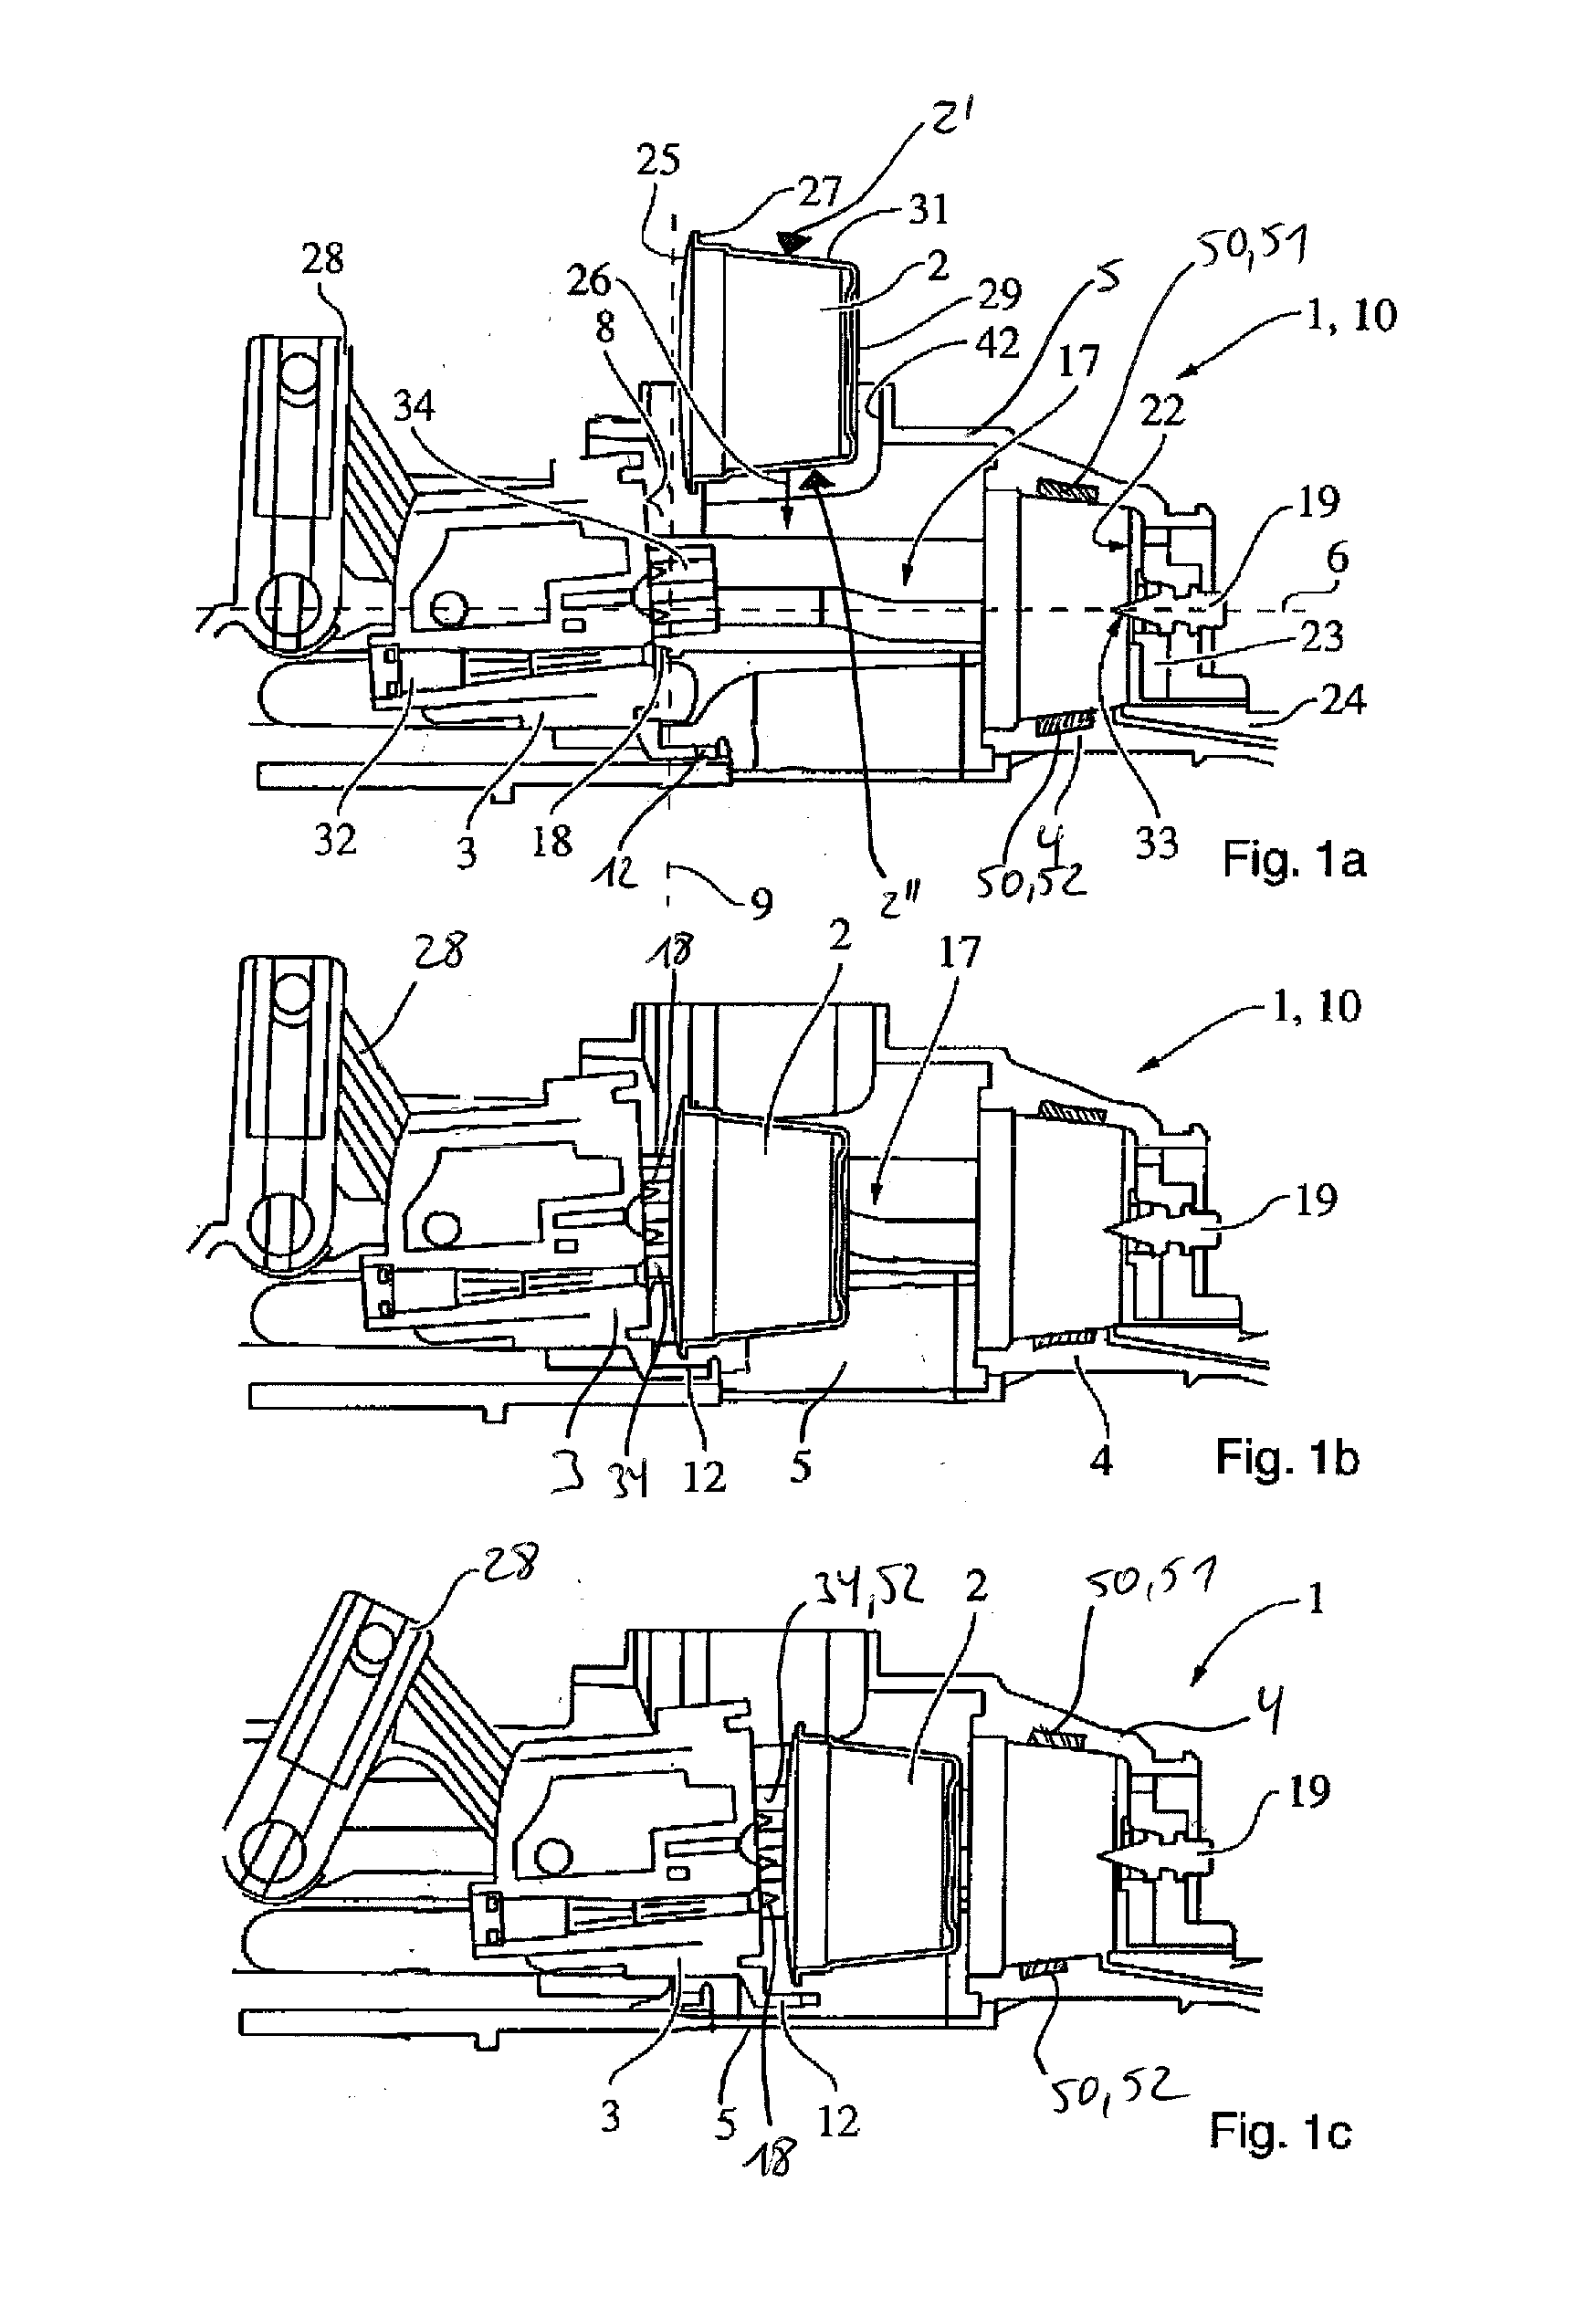 System and method for preparing a beverage